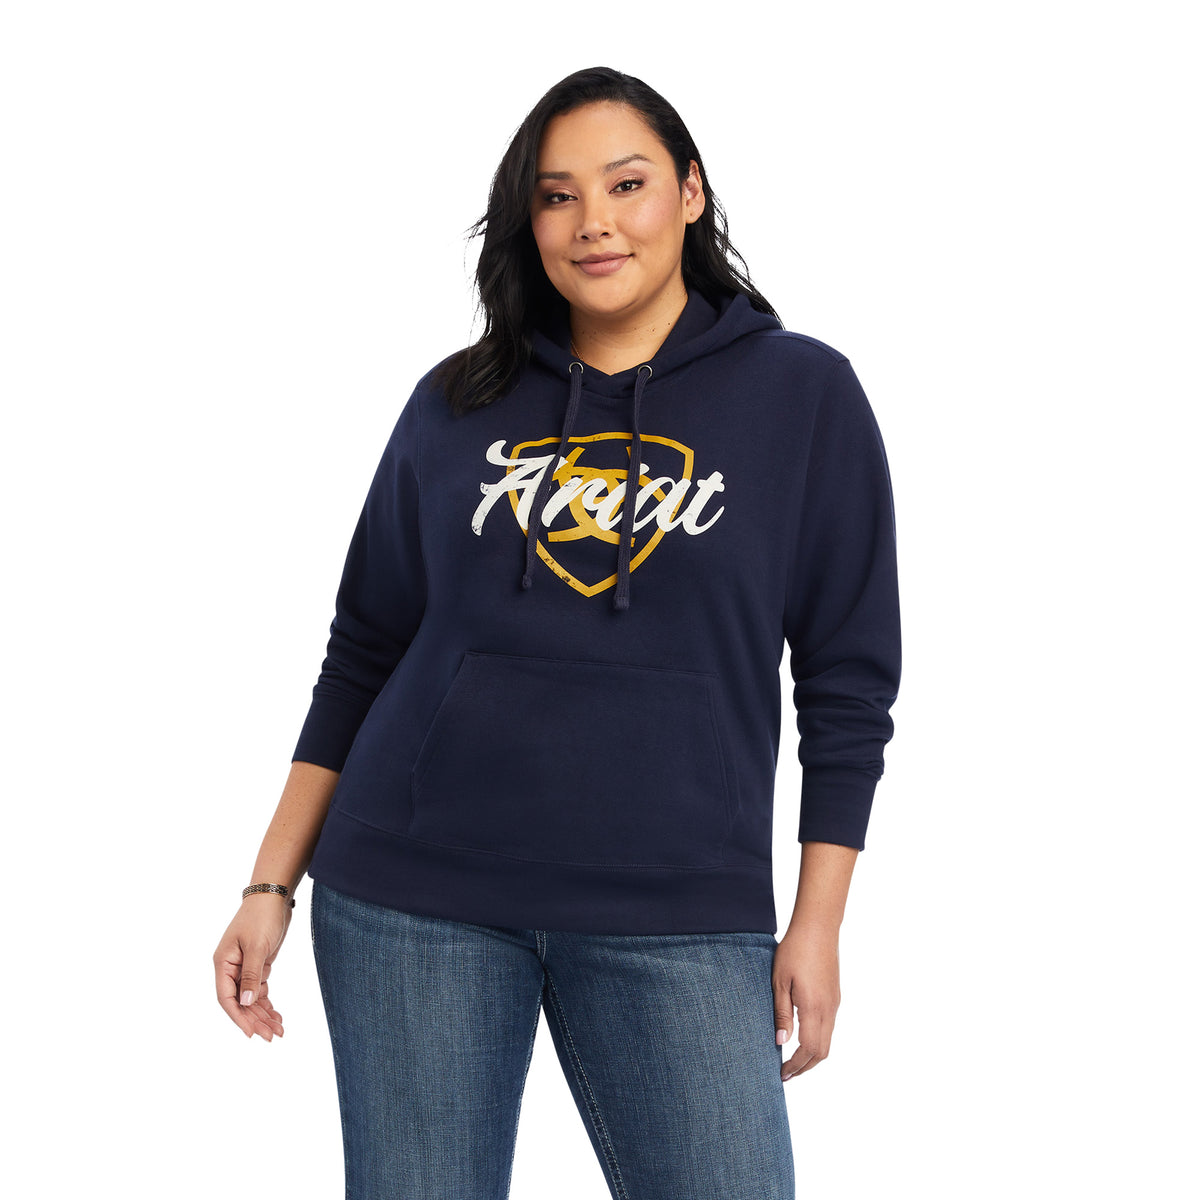 Ariat Womens Real Shield Logo Hoodie - Navy Eclipse